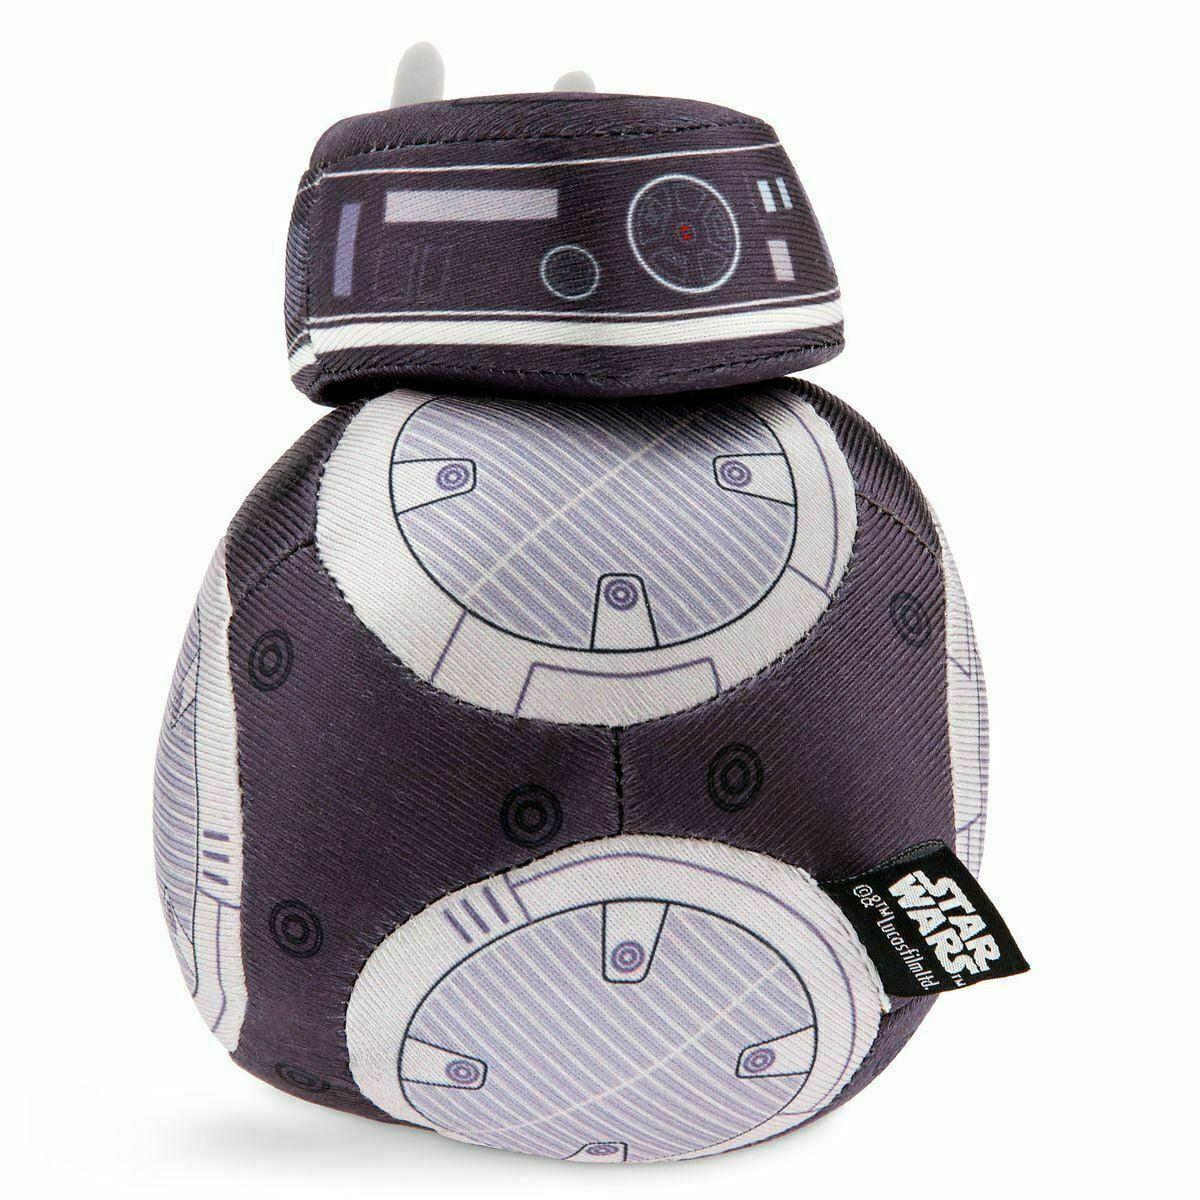 STAR WARS BB-9E 9" TALKING PLUSH WITH LIGHTS BRAND NEW GREAT GIFT SOFT TOY 